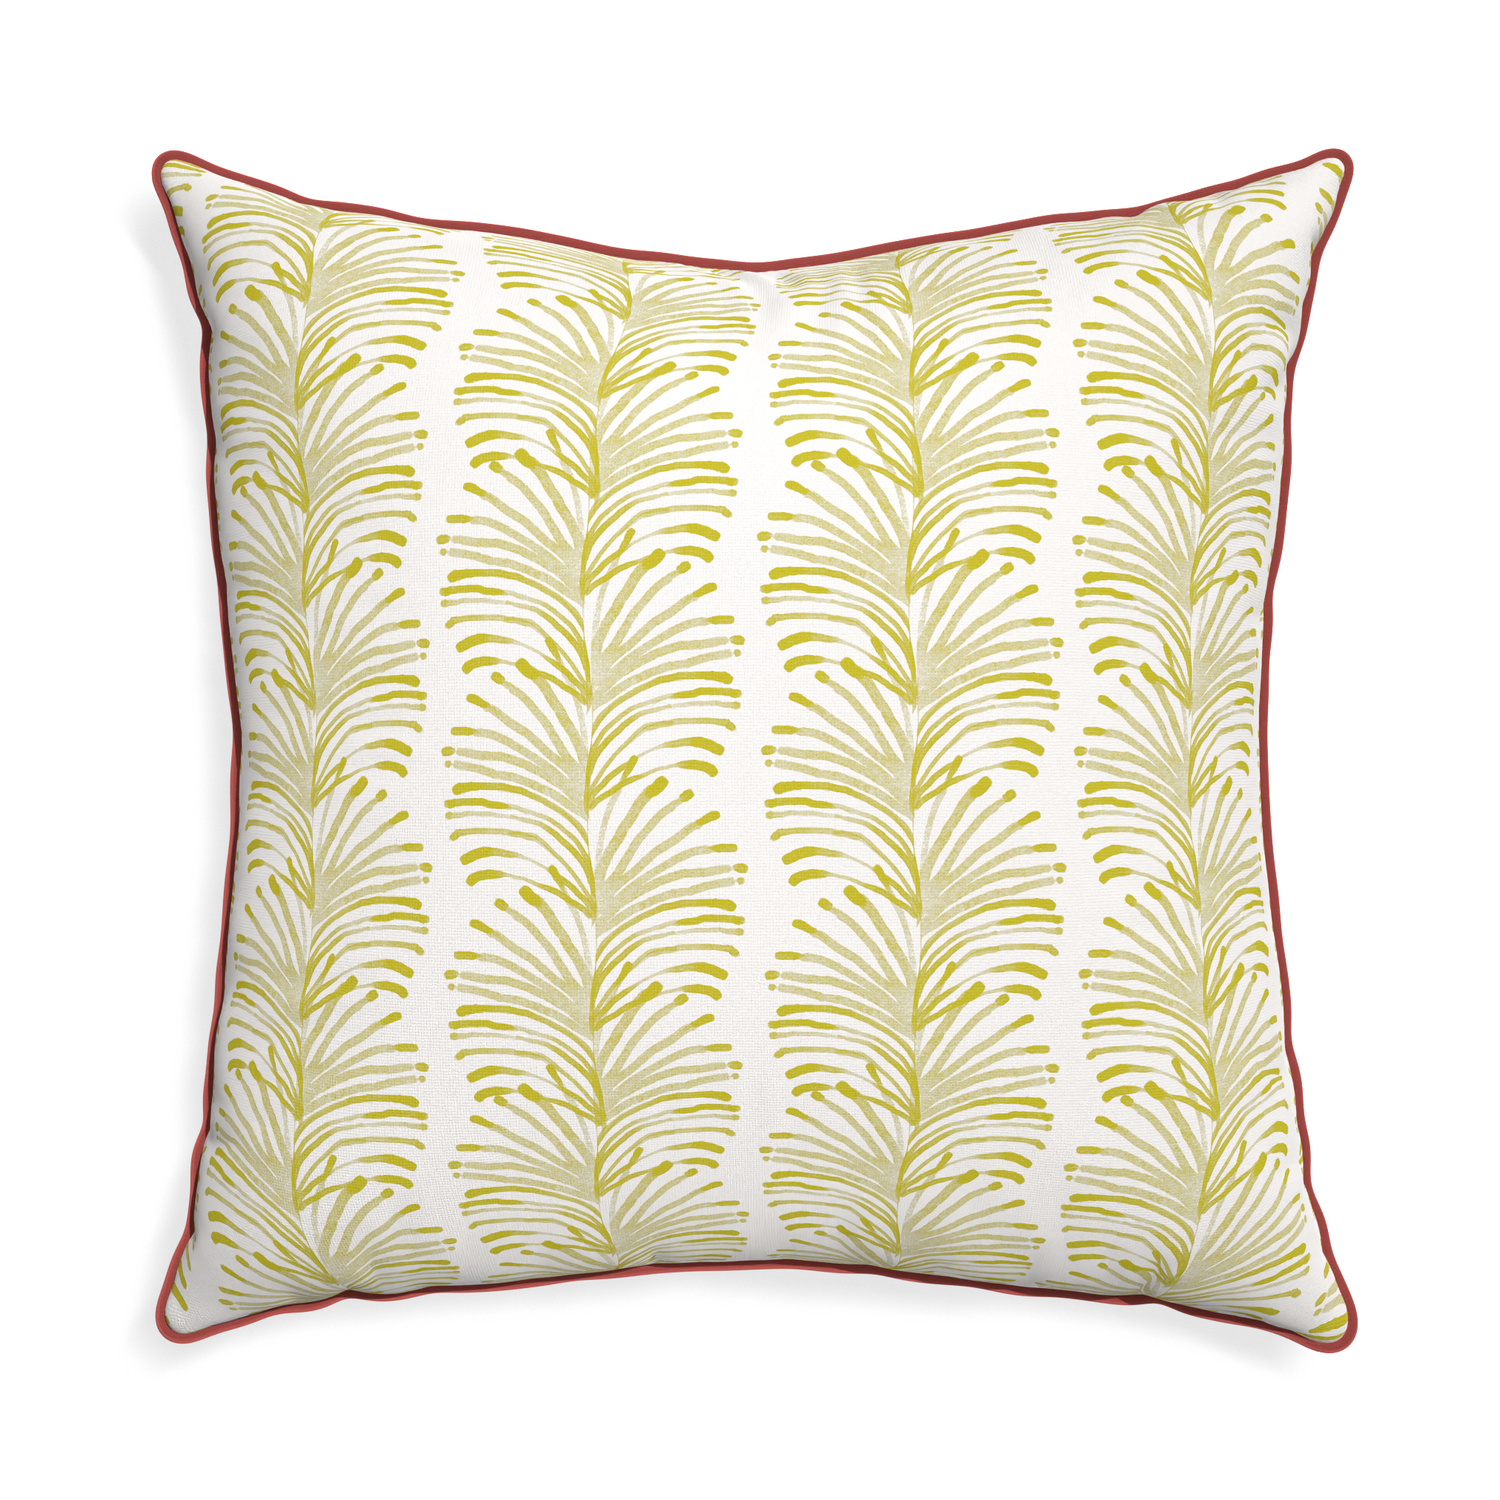 Euro-sham emma chartreuse custom yellow stripe chartreusepillow with c piping on white background